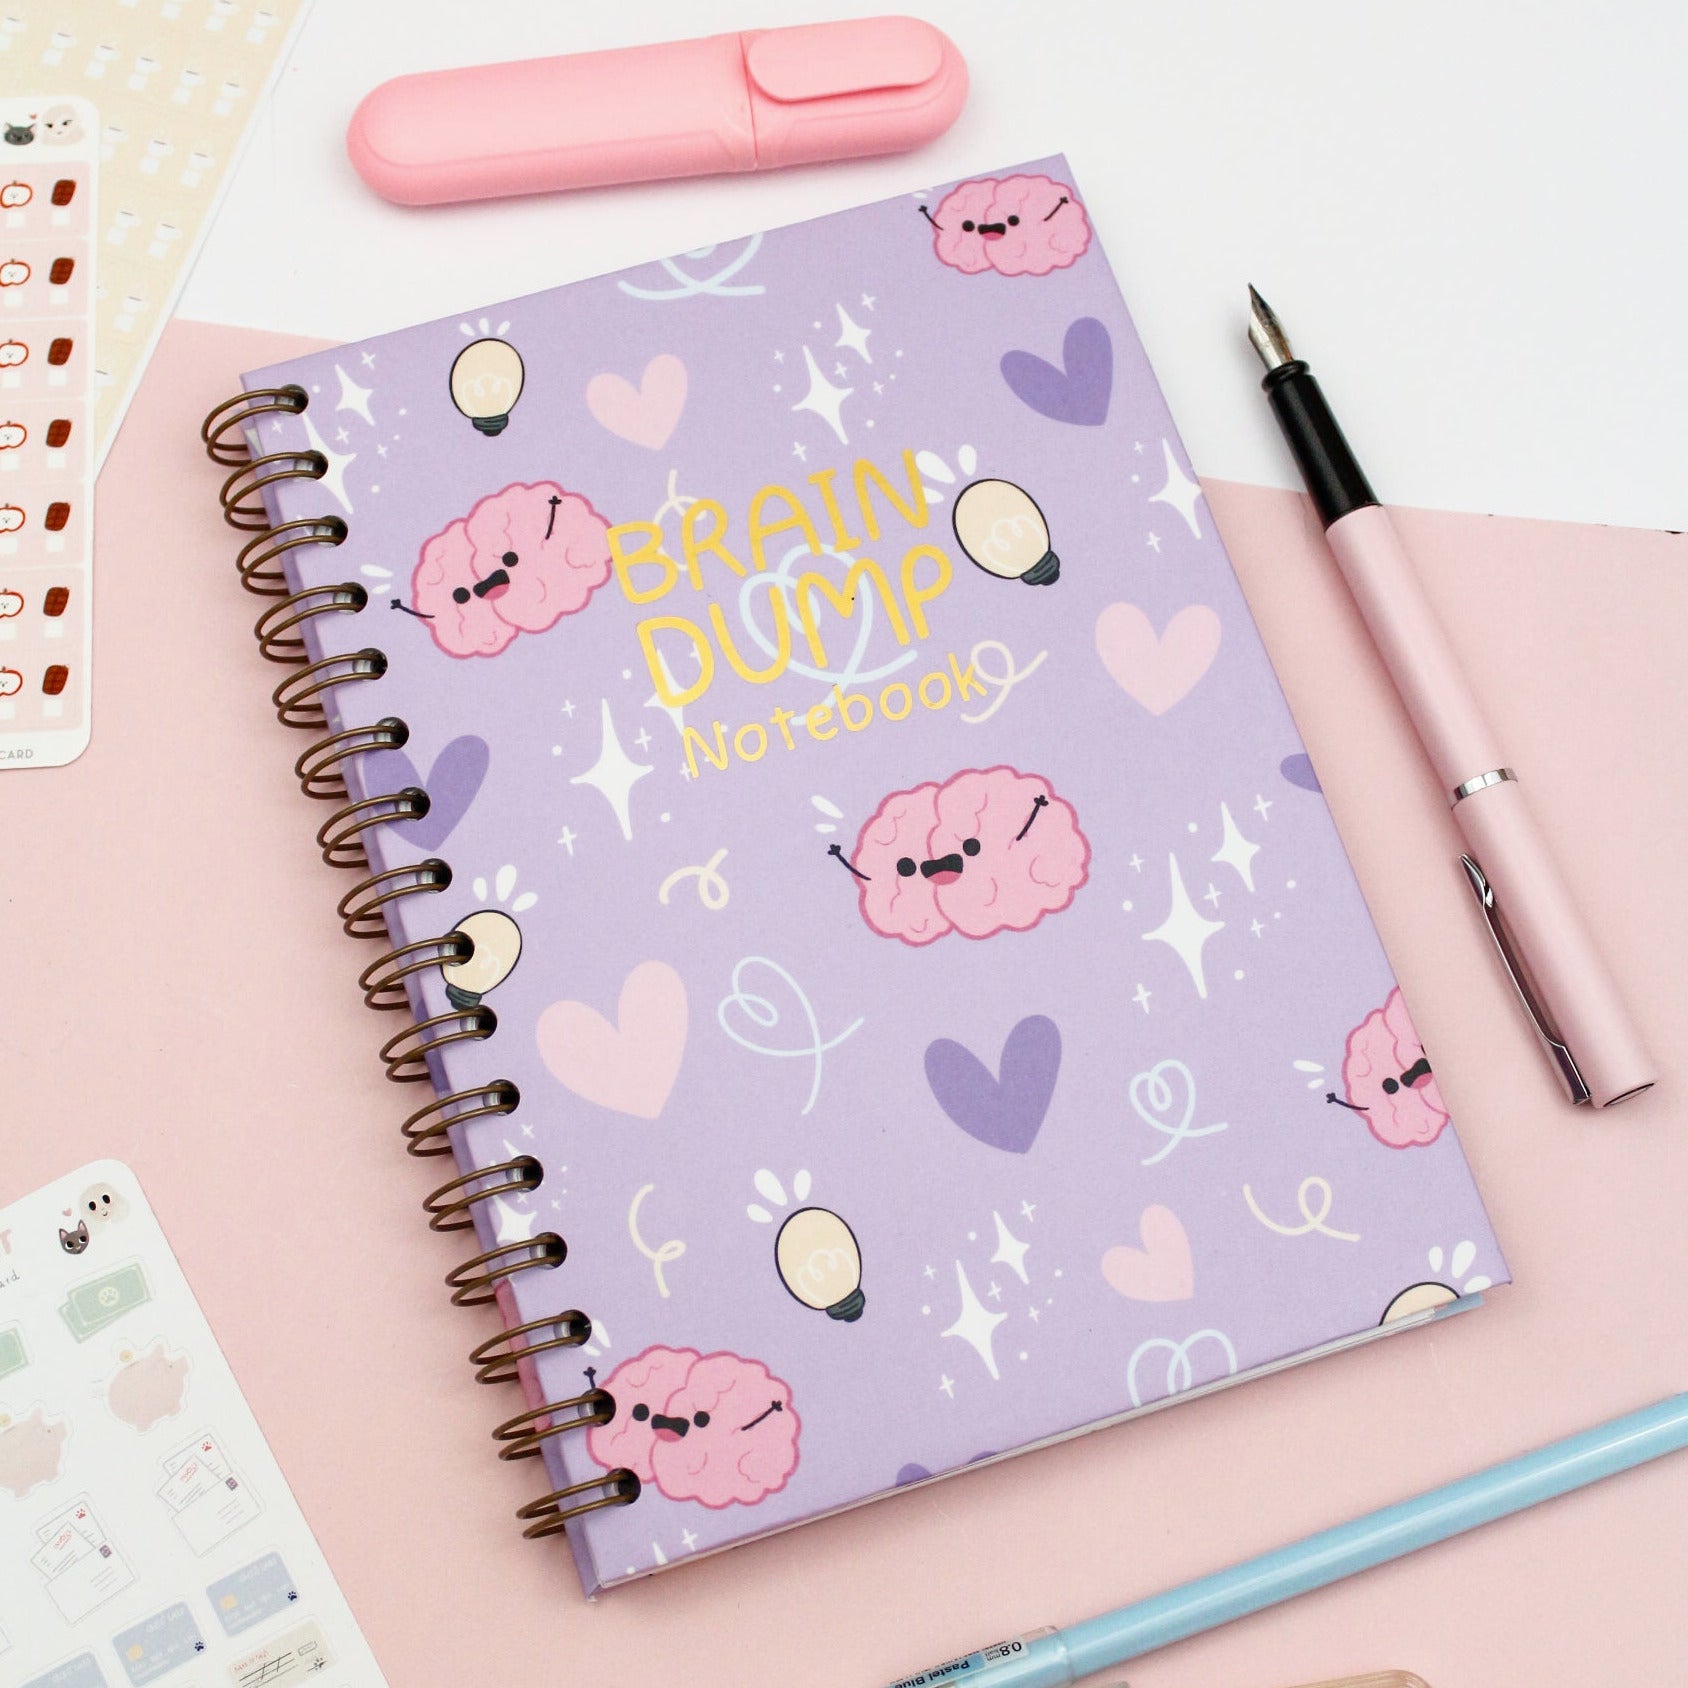 kawaii notebook with purple covers and cute brains